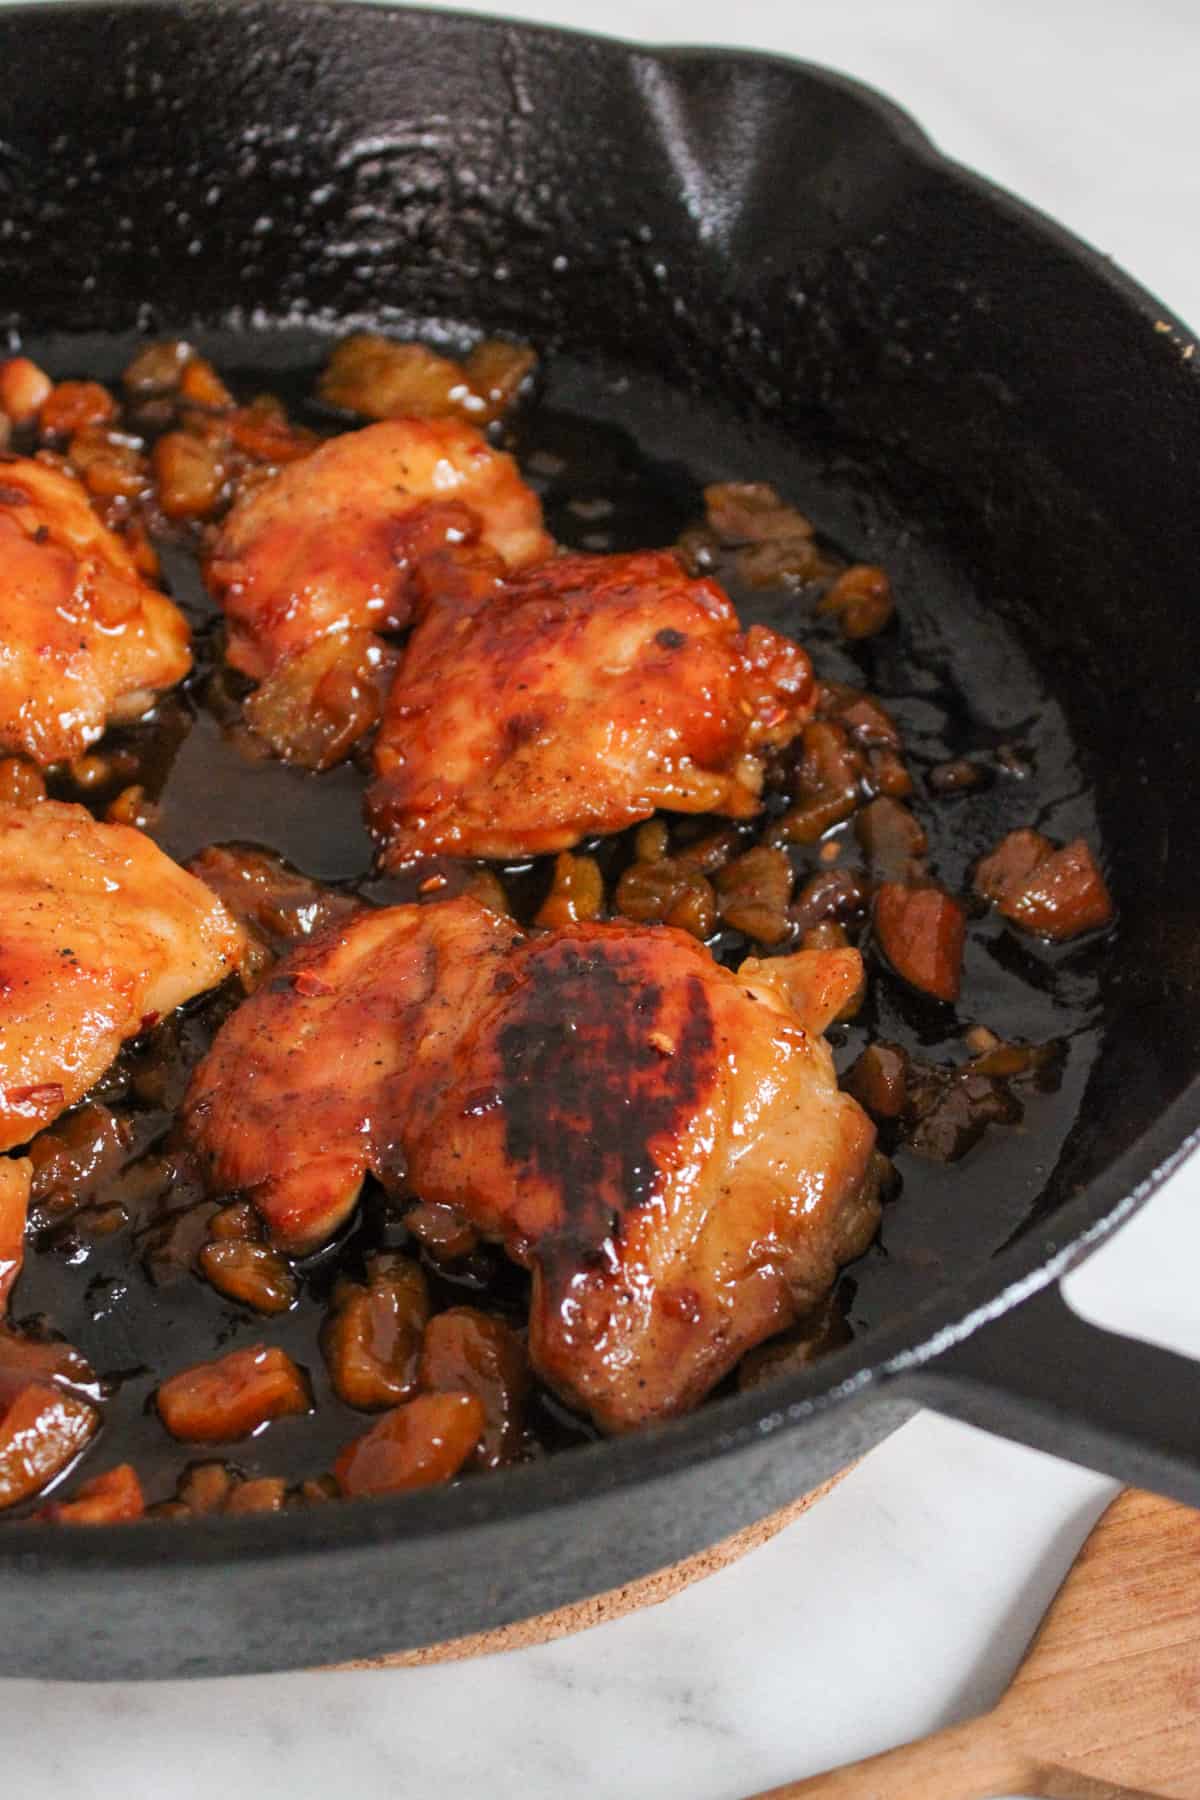 seared chicken thighs in a black cast iron pan, glazed in a sticky apricot sauce